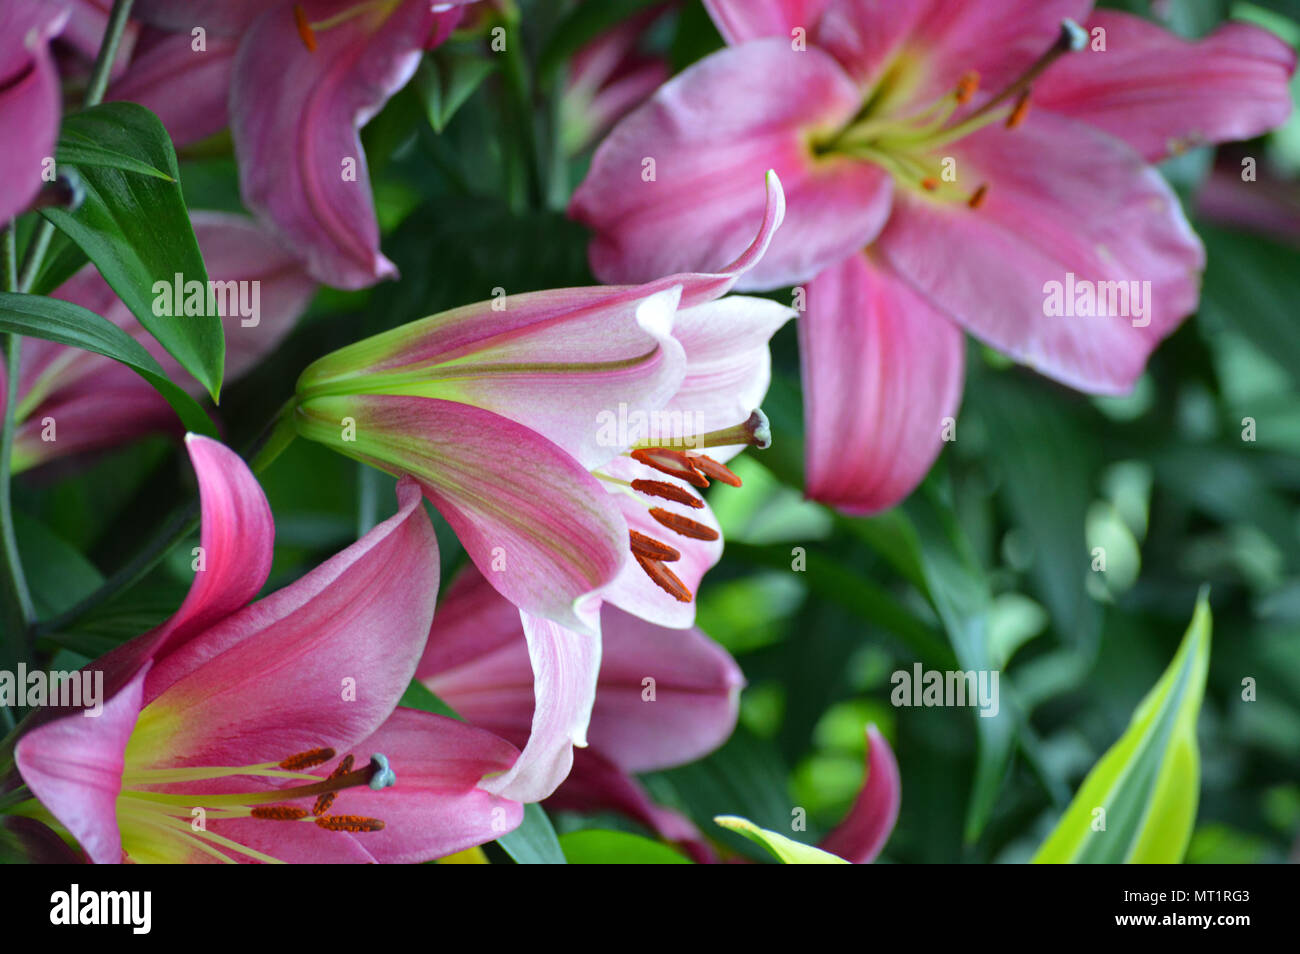 Lily flower blooming in the garden Stock Photo